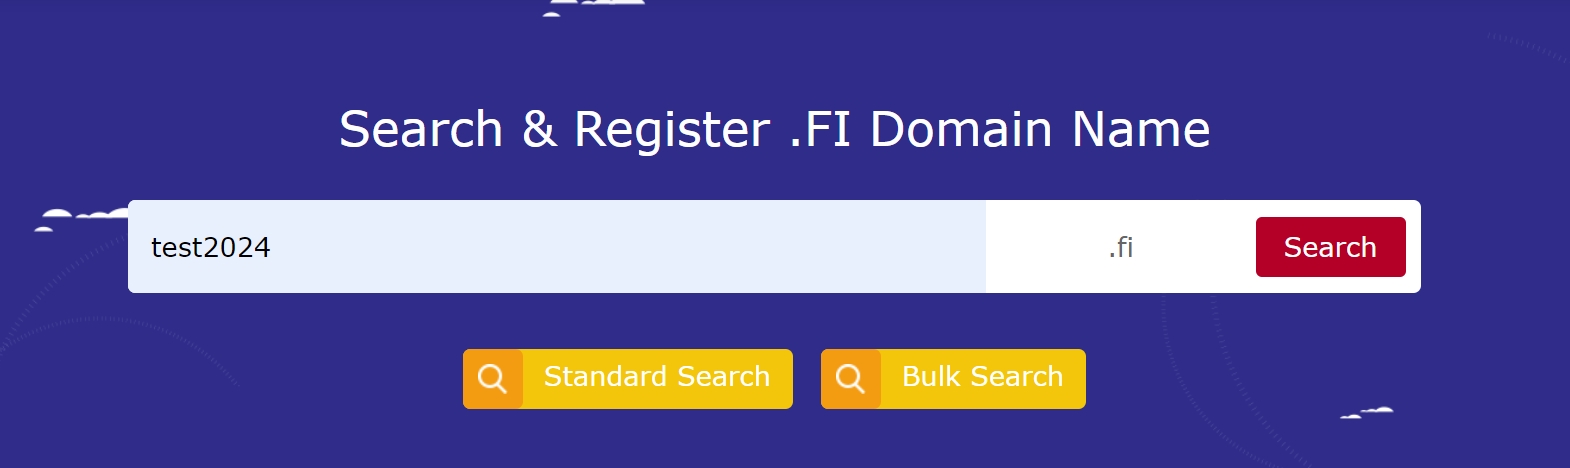 How to register a .fi domain name in Finland?